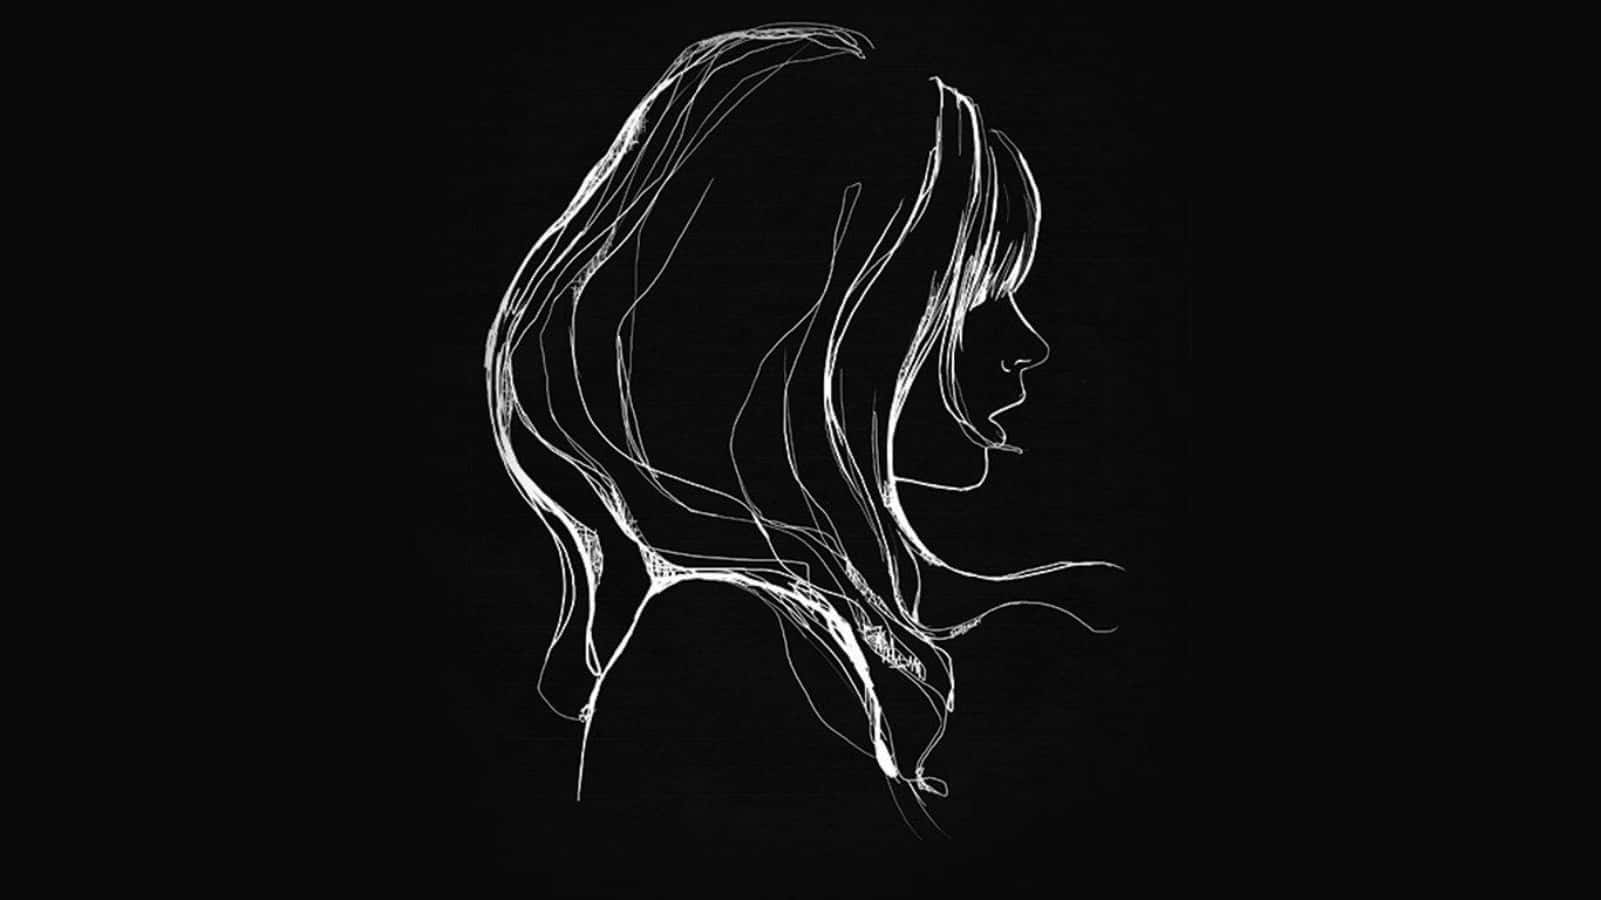 A Black And White Drawing Of A Woman's Face Wallpaper